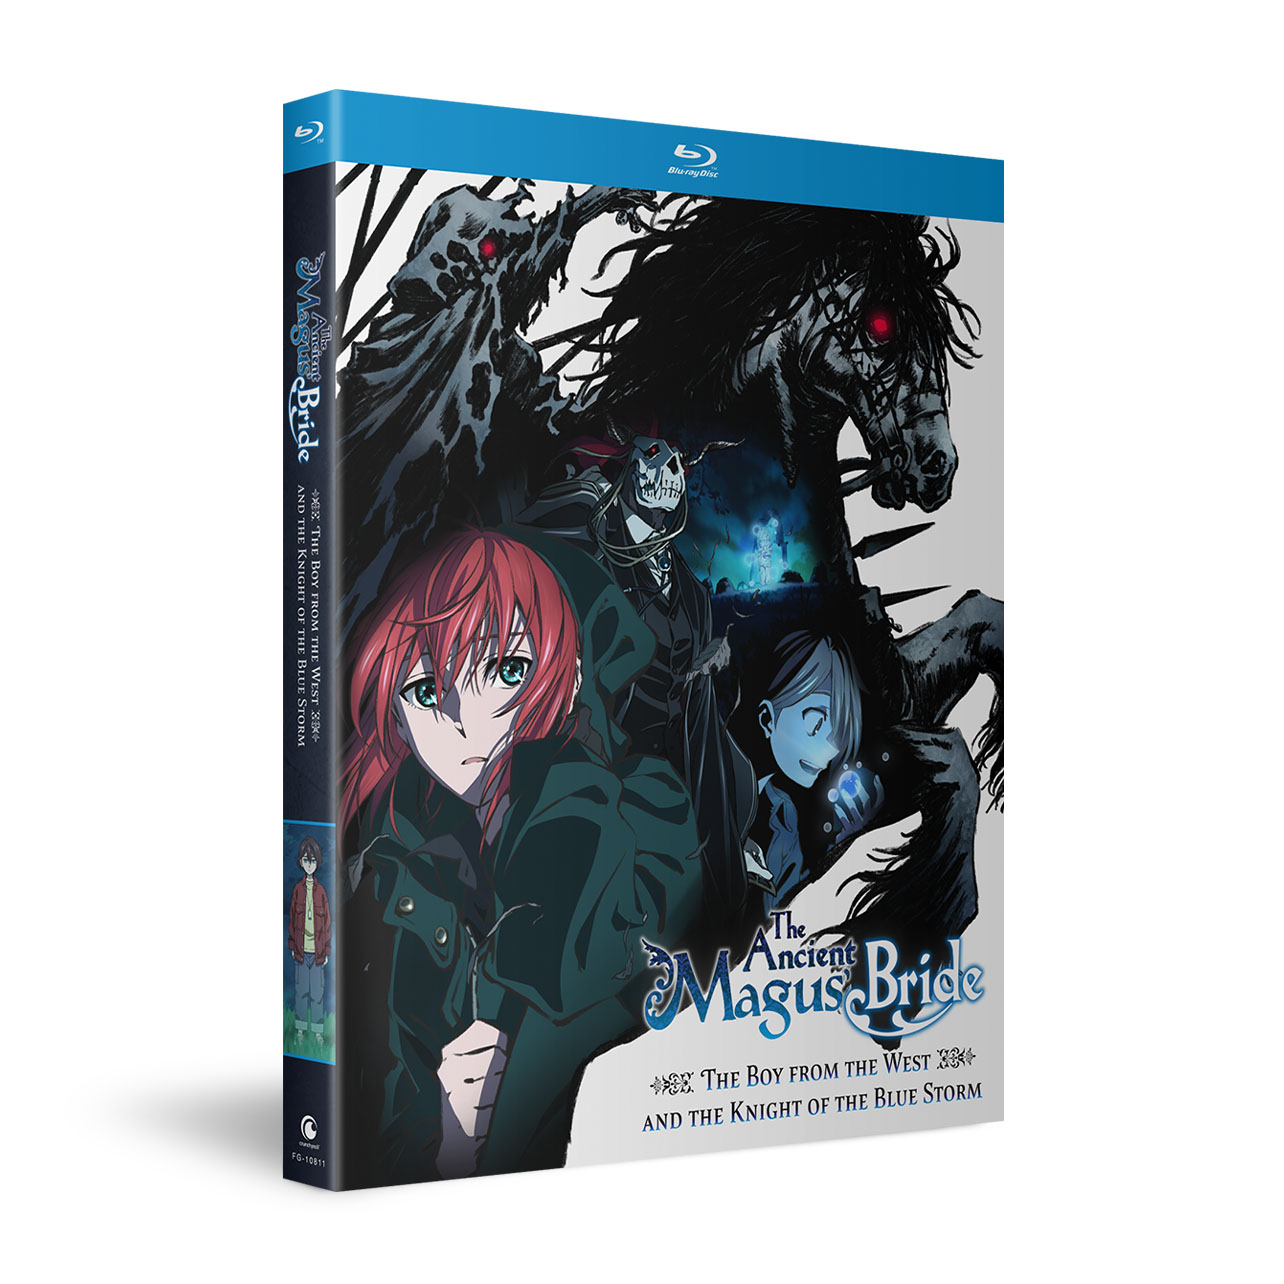 The Ancient Magus' Bride - The Boy from the West and the Knight of the Blue Storm - OVA - Blu-ray image count 2